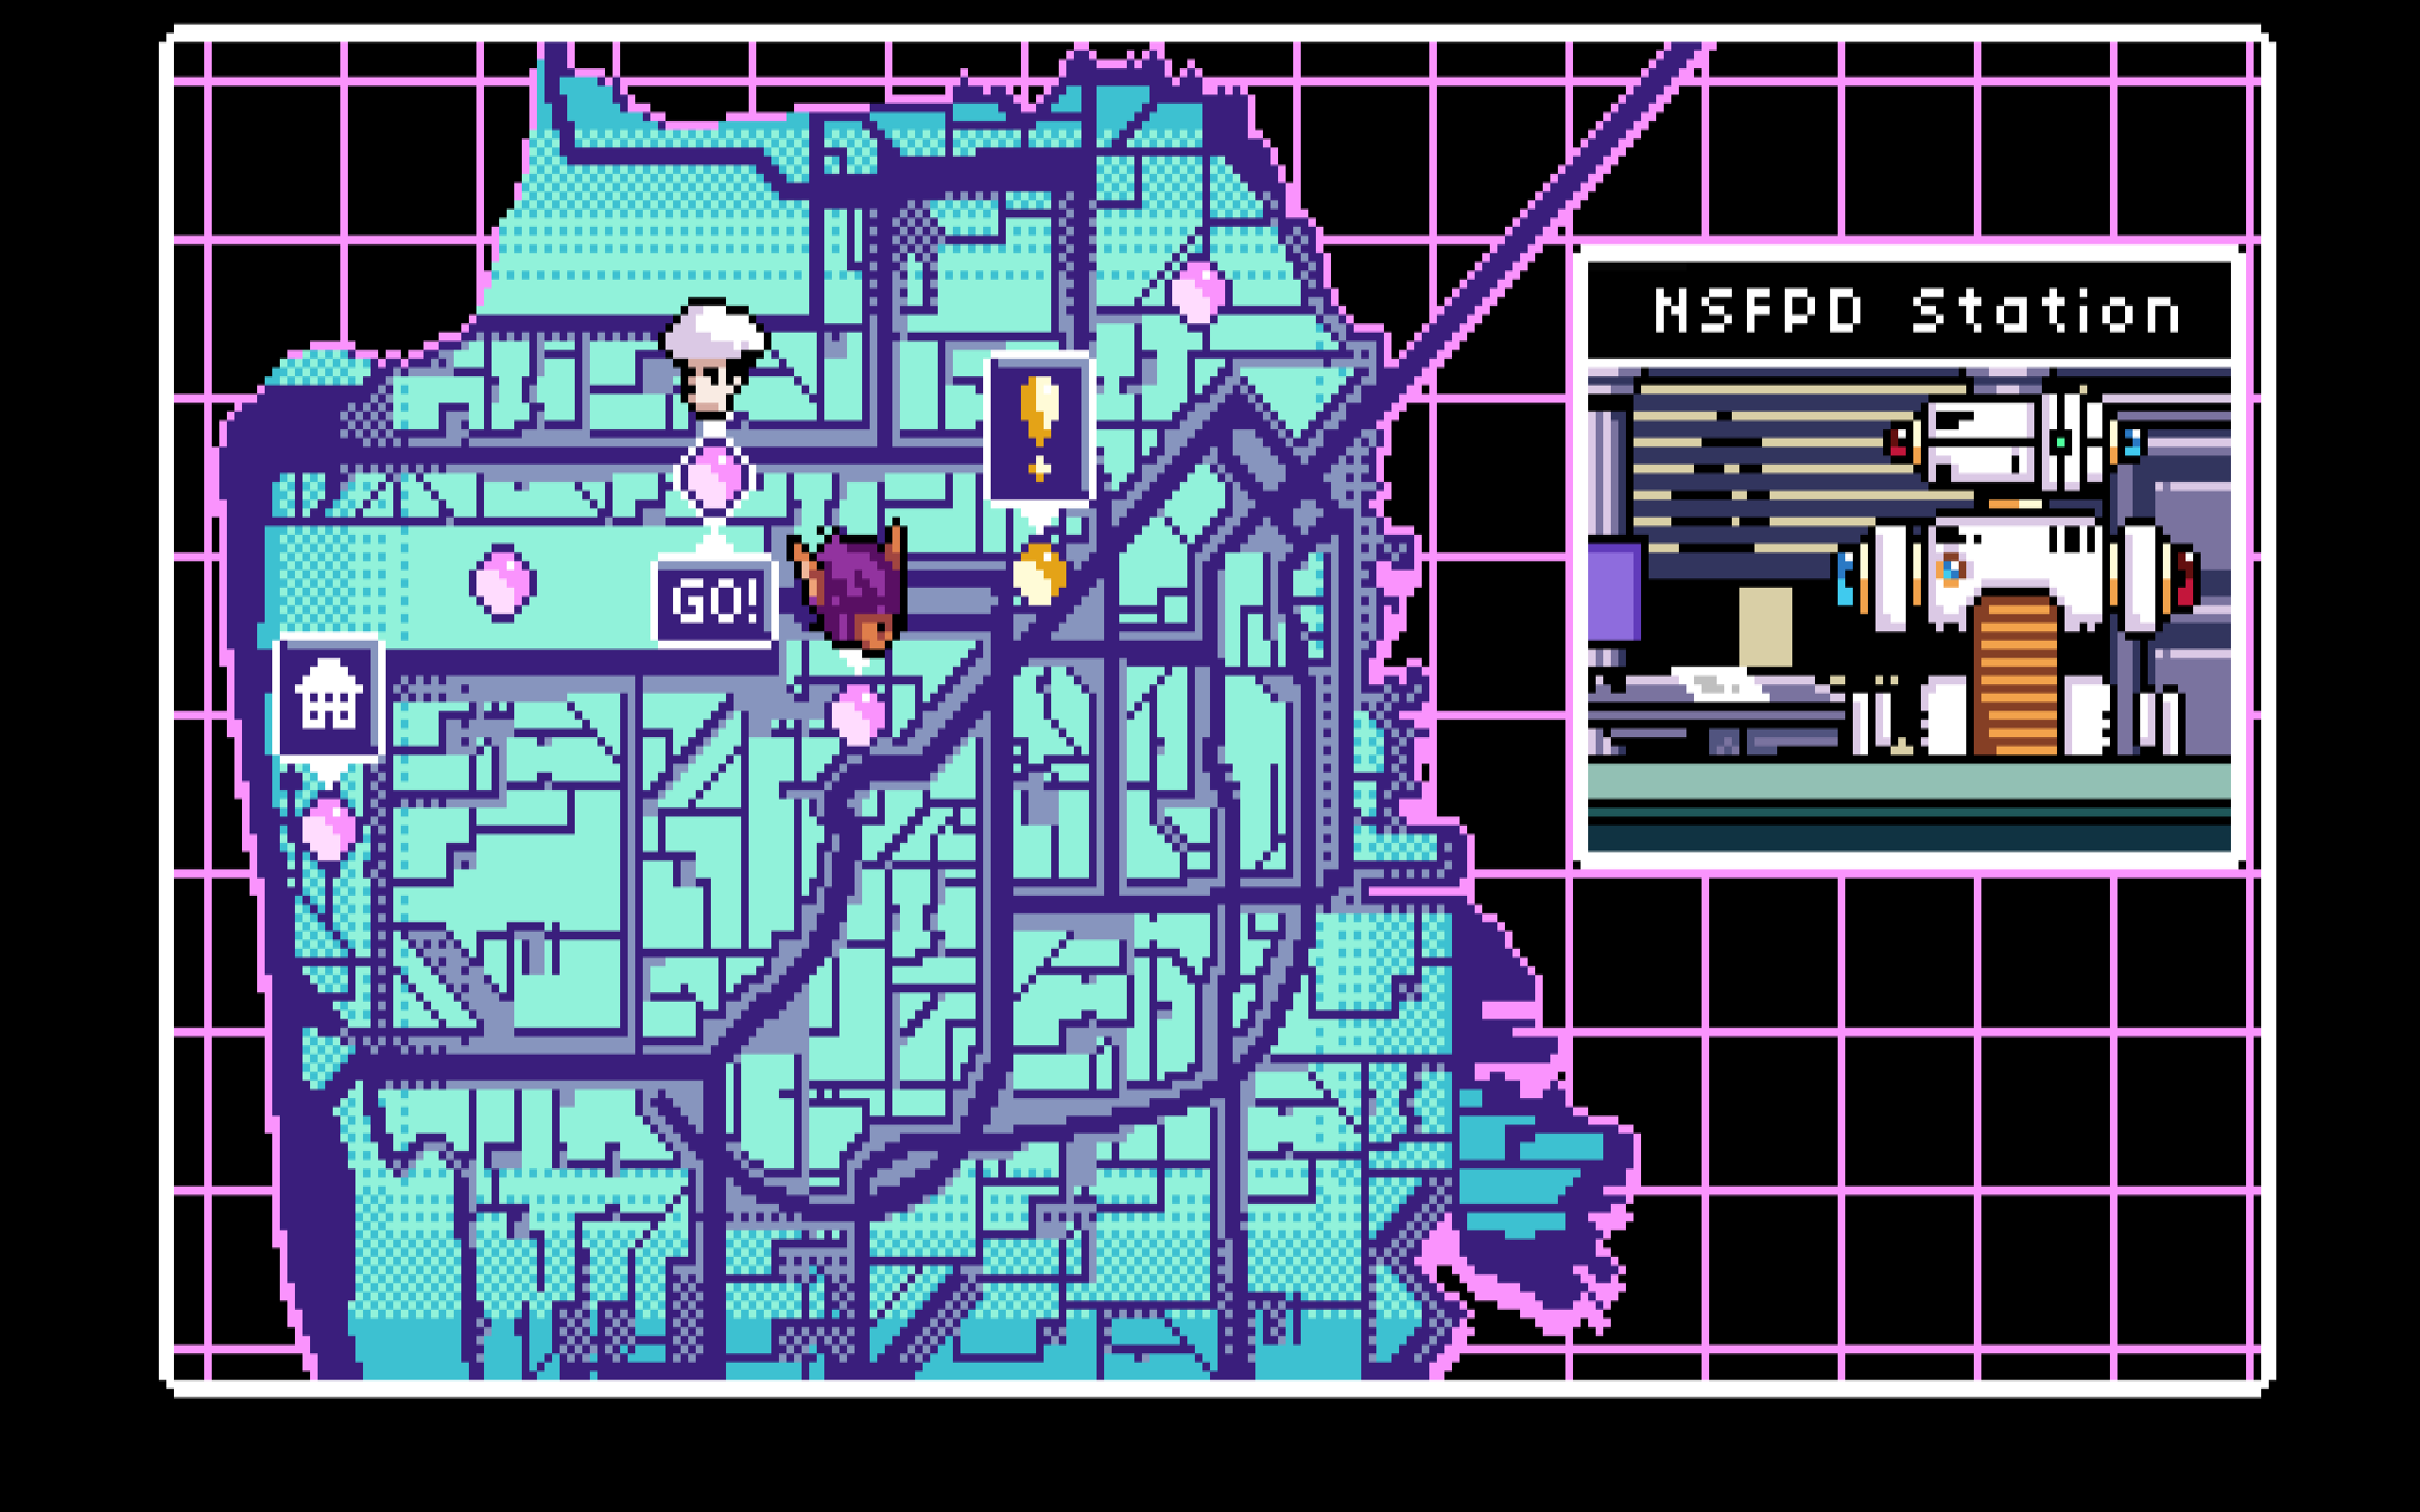 Read Only Memories #8